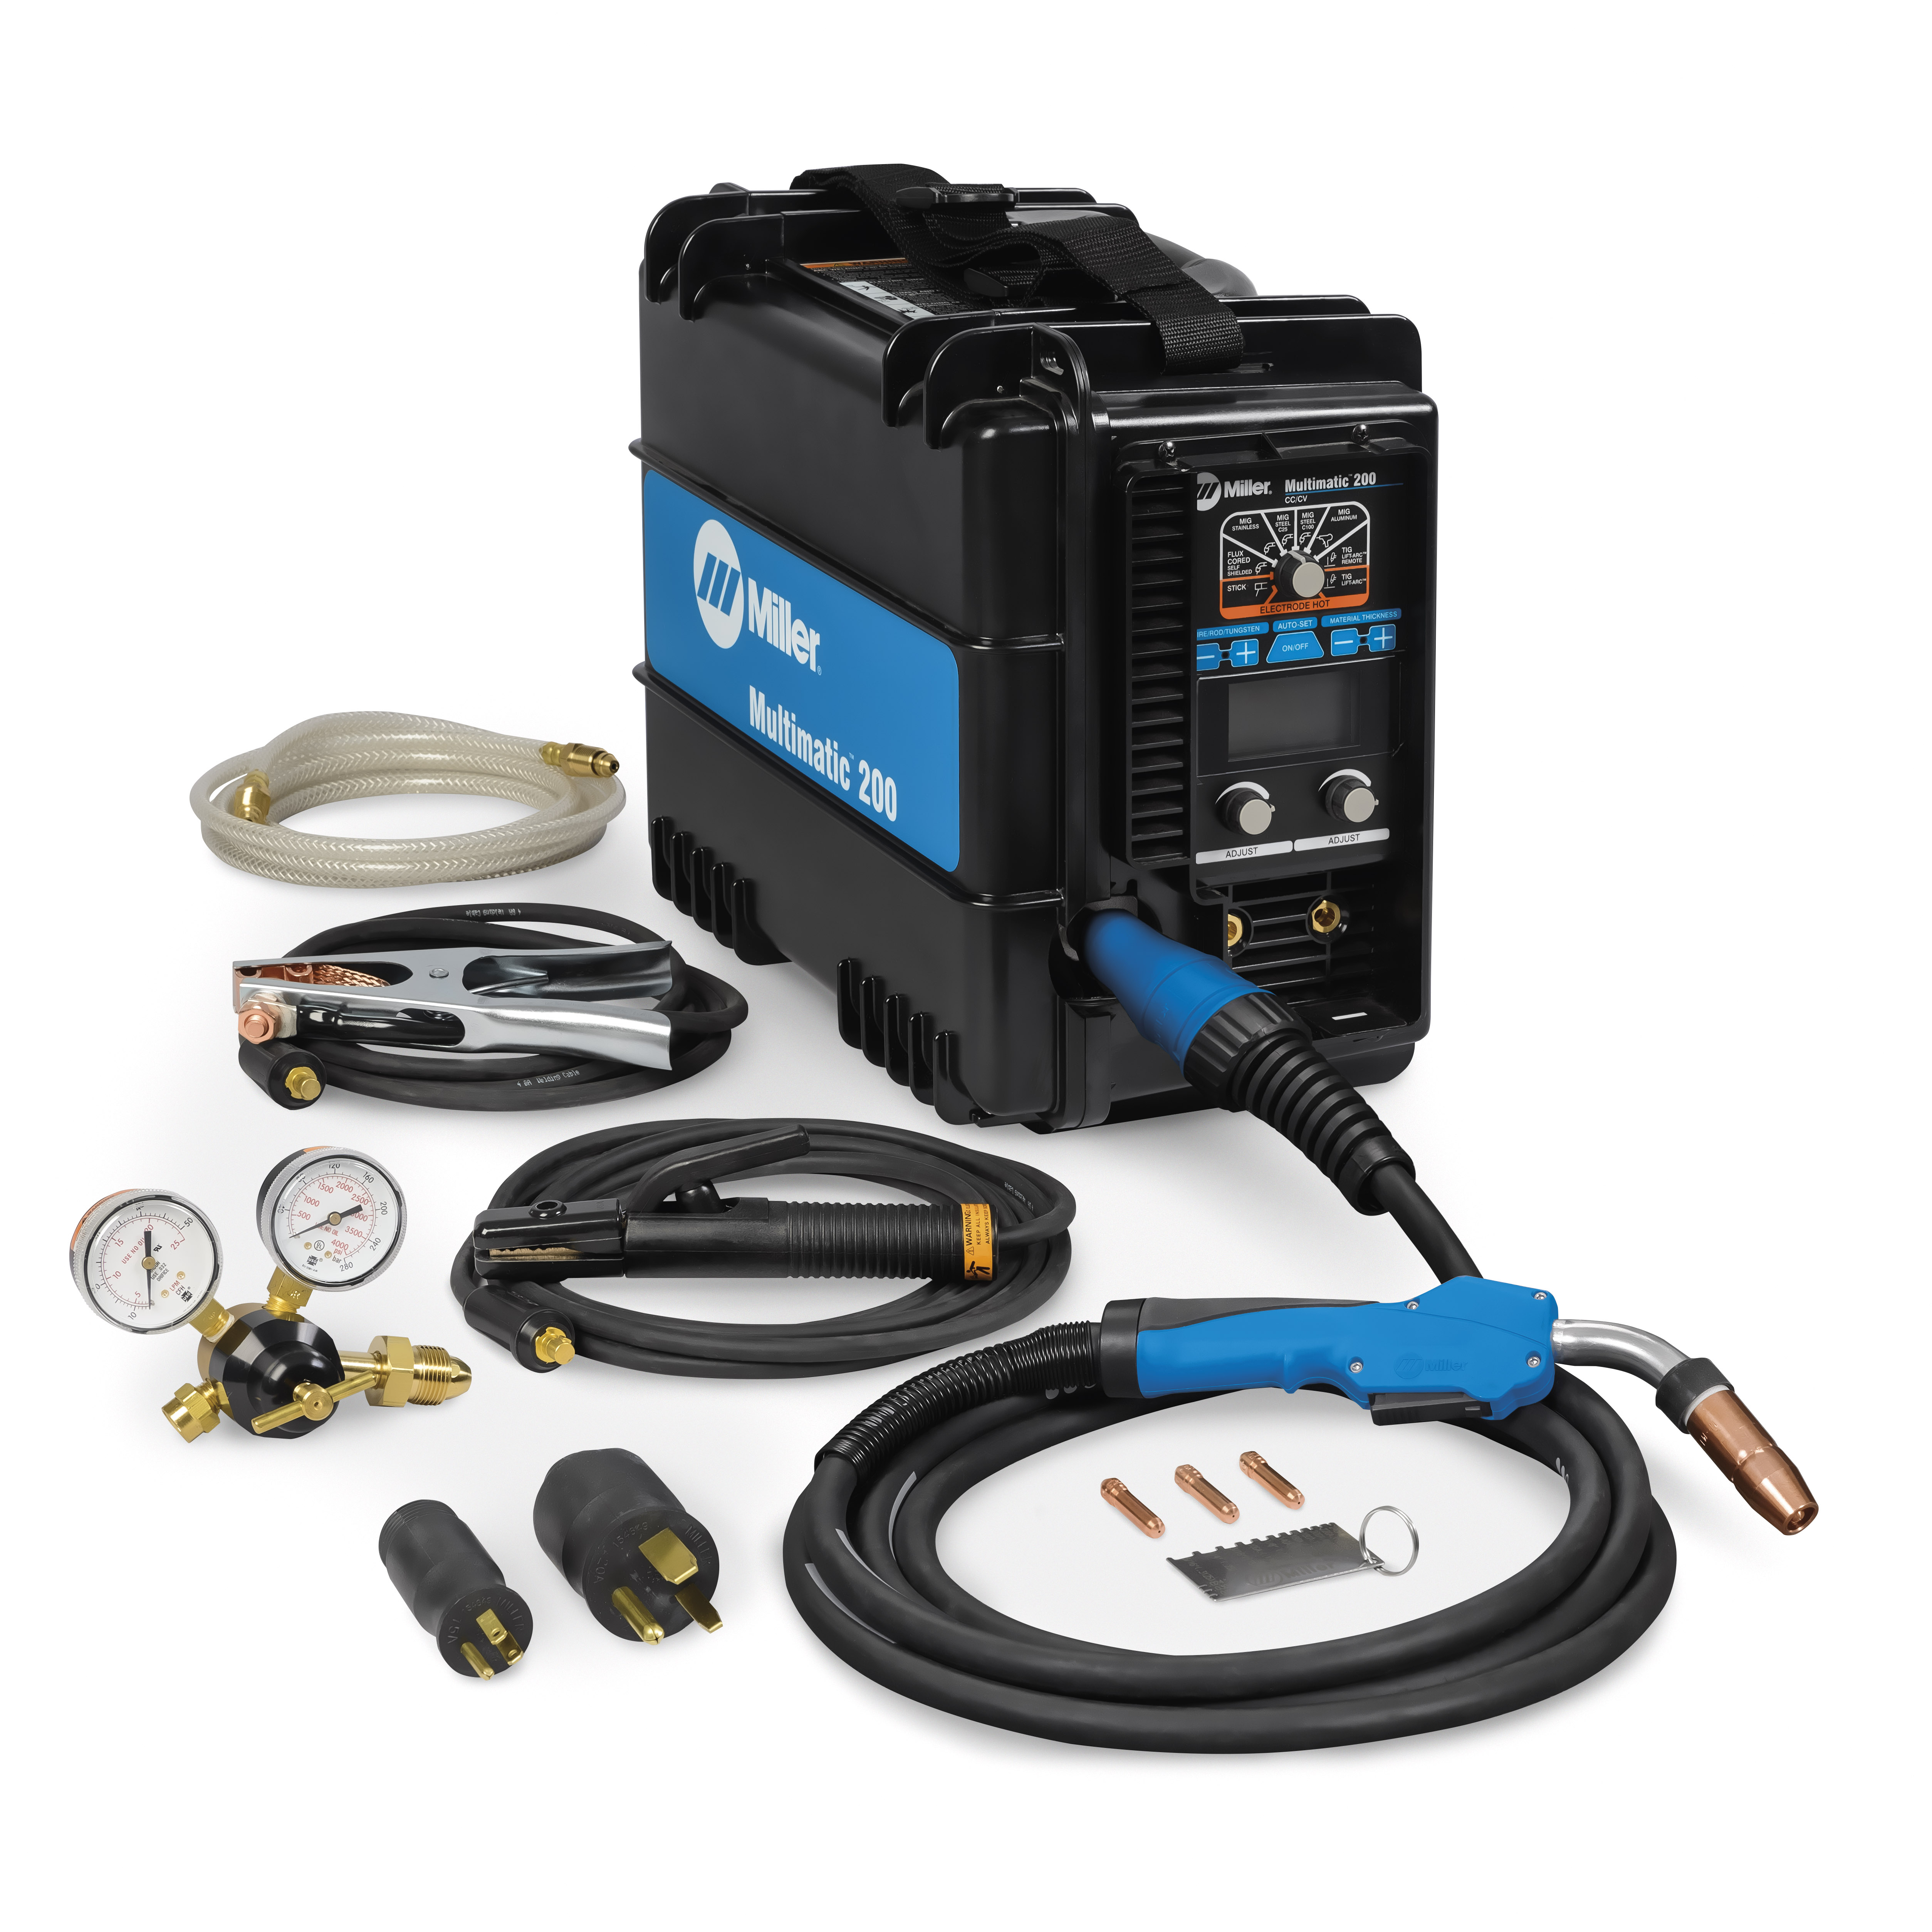 What Can a 200 Amp Welder Do? 